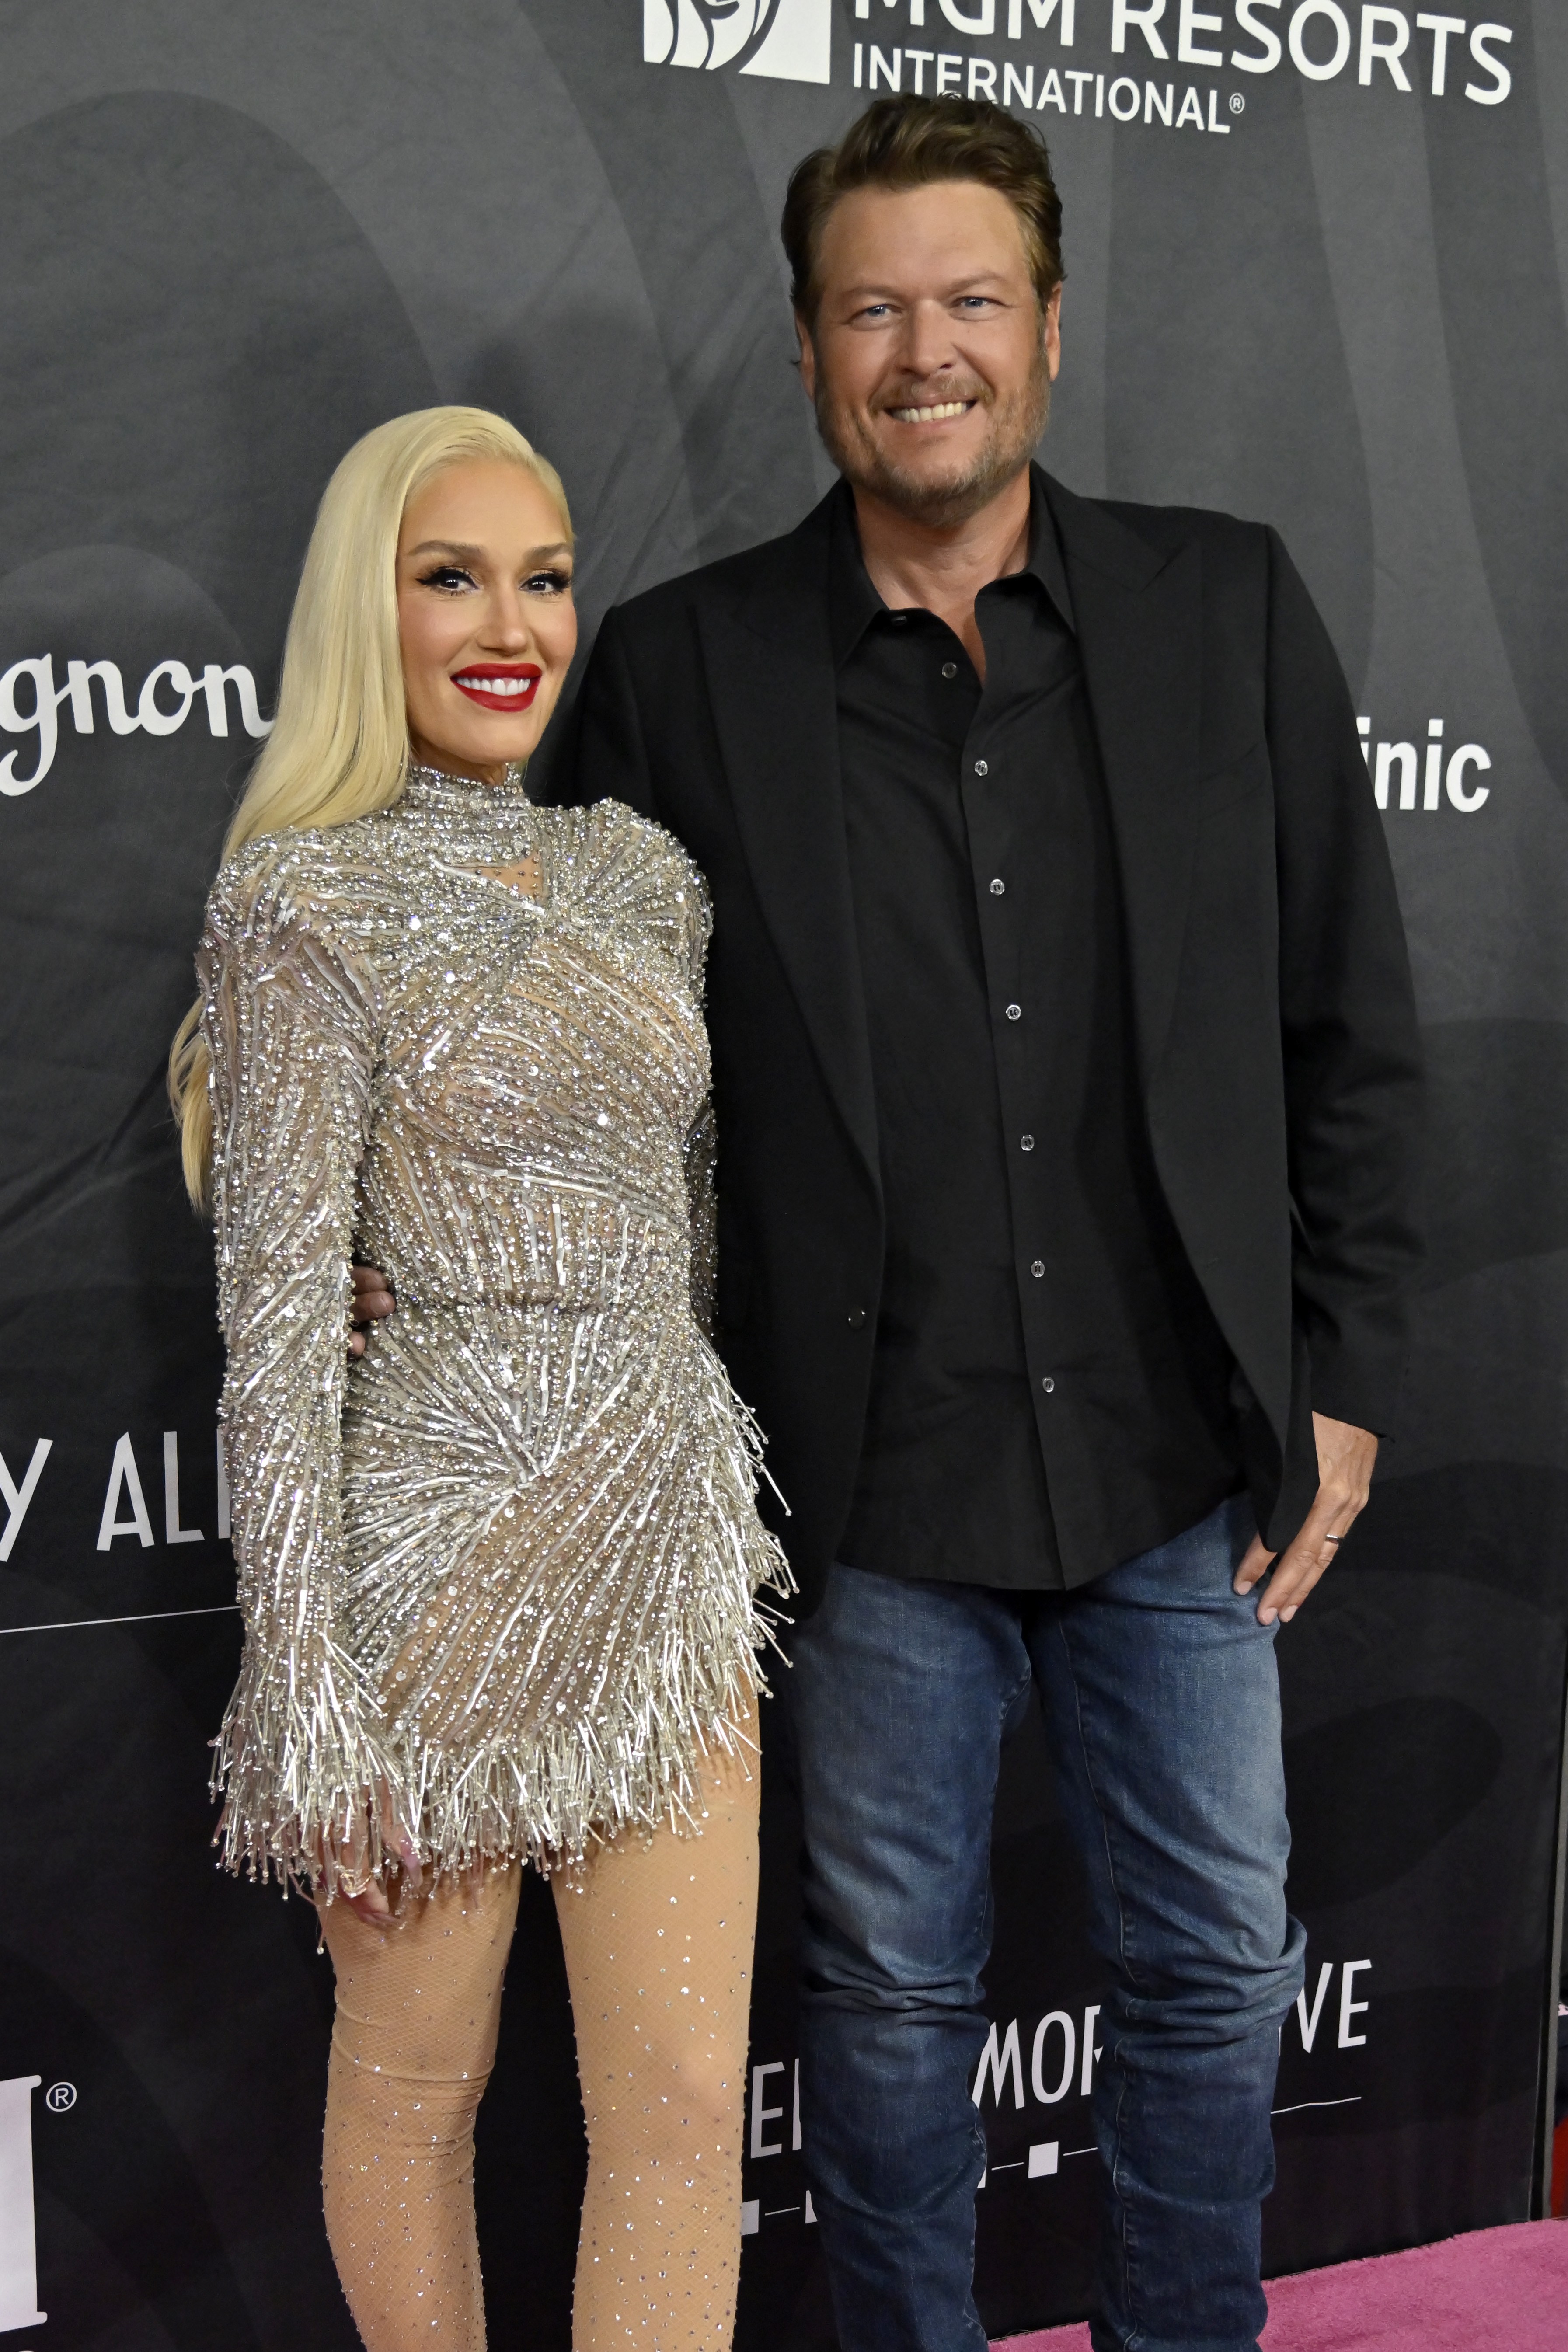 His mom, Gwen Stefani, co-parents the teen with husband Blake Shelton